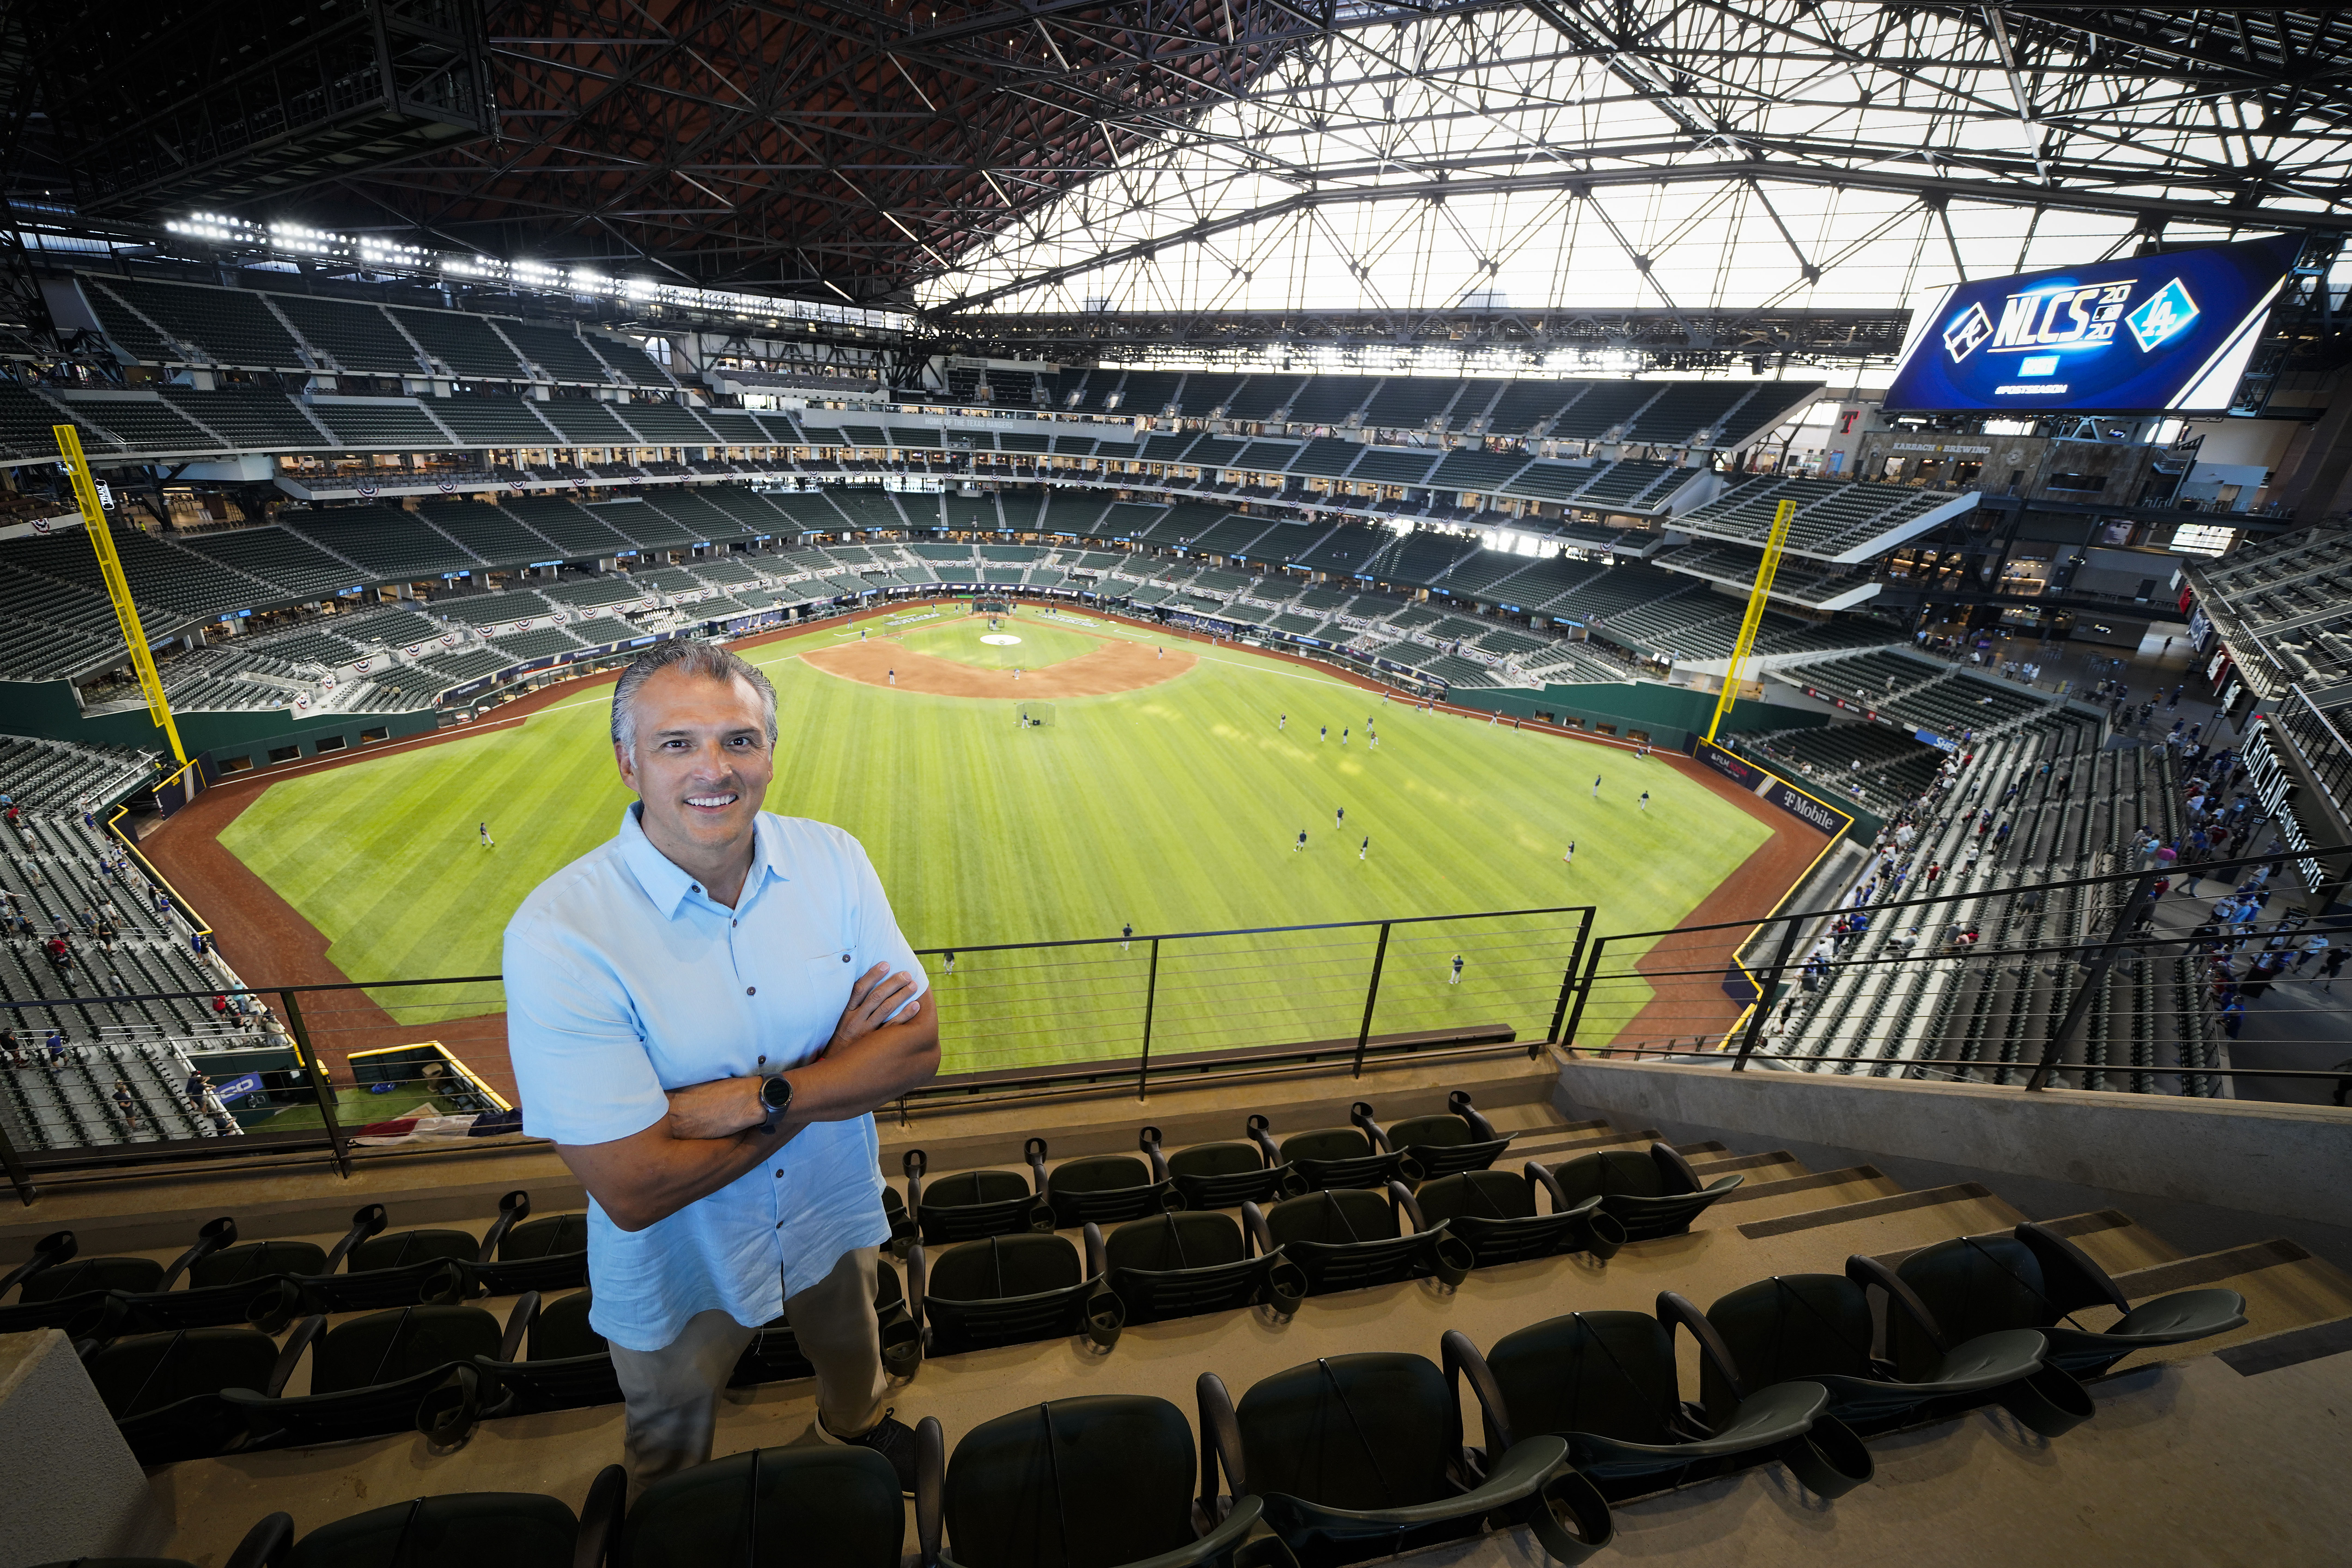 Like Globe Life Field, the story of Fred Ortiz, the stadium's lead